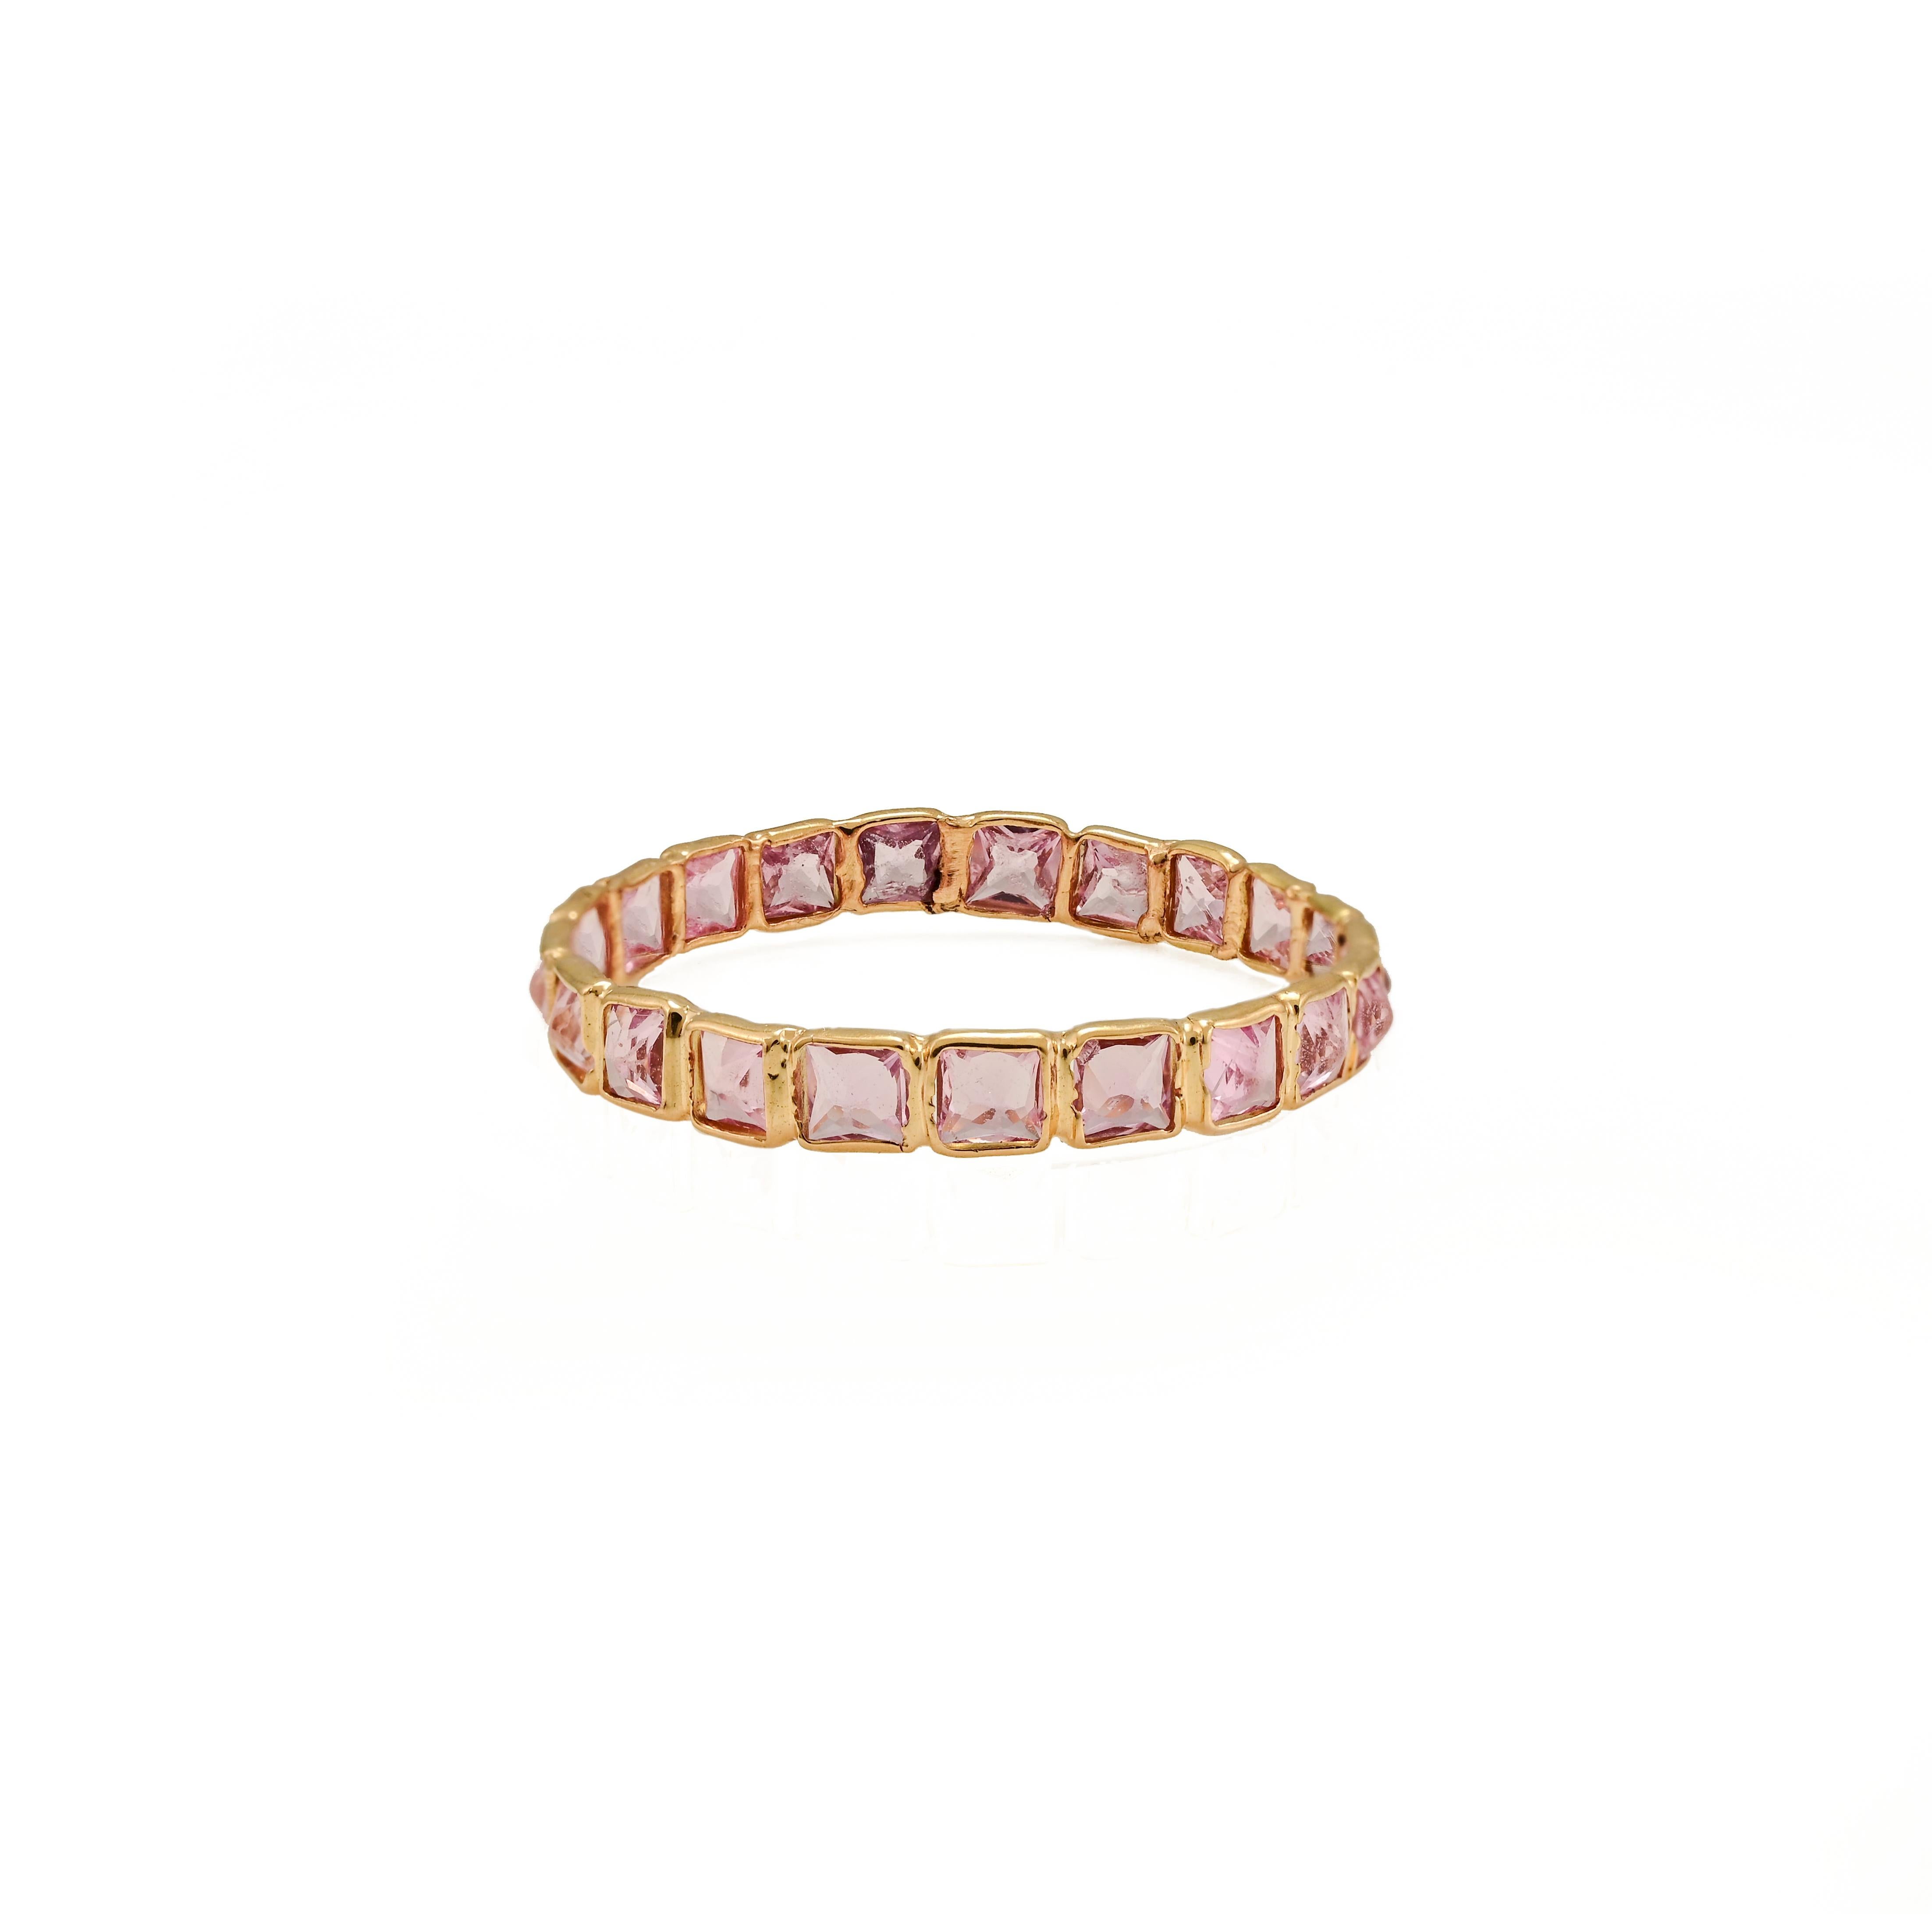 For Sale:  18 Karat Solid Yellow Gold Thin Pink Sapphire Eternity Band Ring, Everyday Ring  3